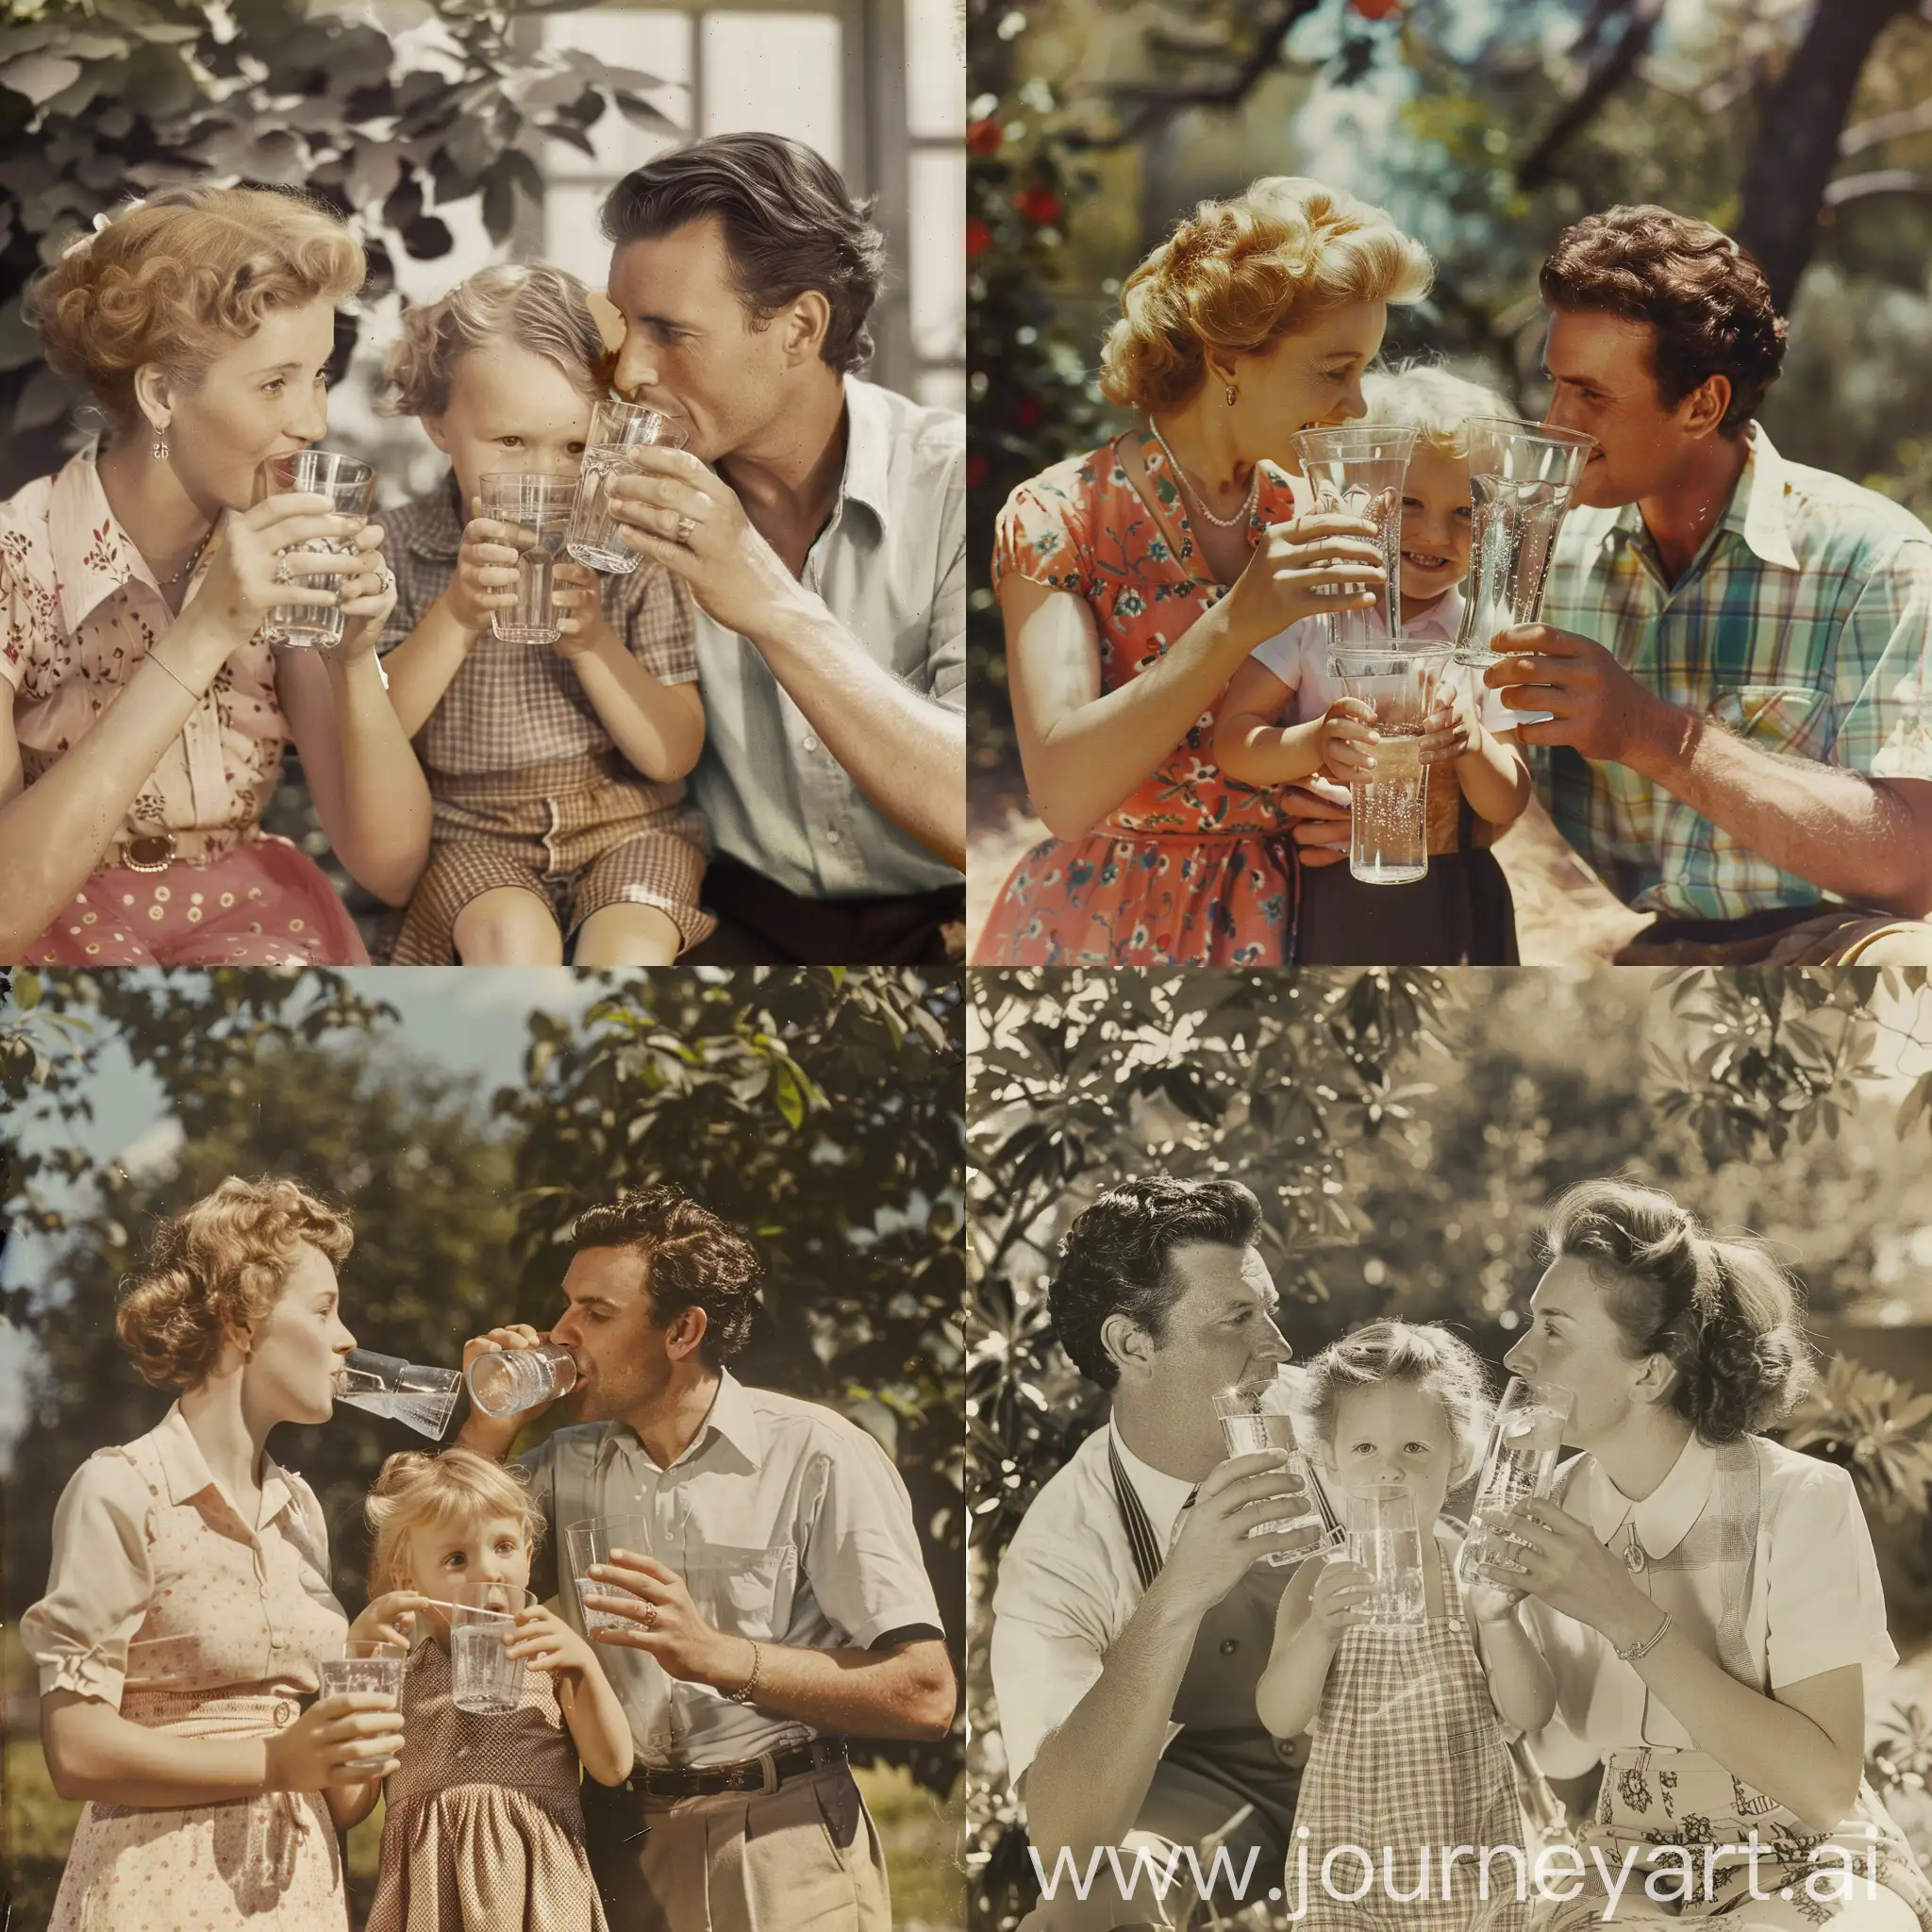 vintage photo of a cute family drinking water from transparent glasses